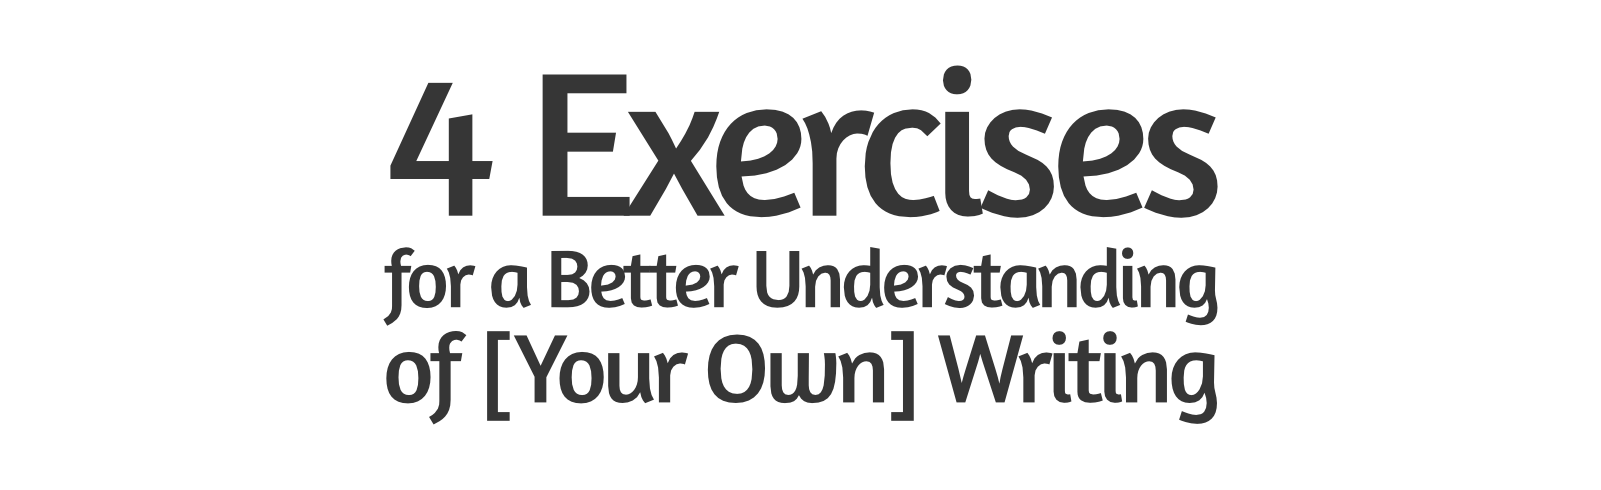 4 Exercises for a Better Understanding of [Your Own] Writing